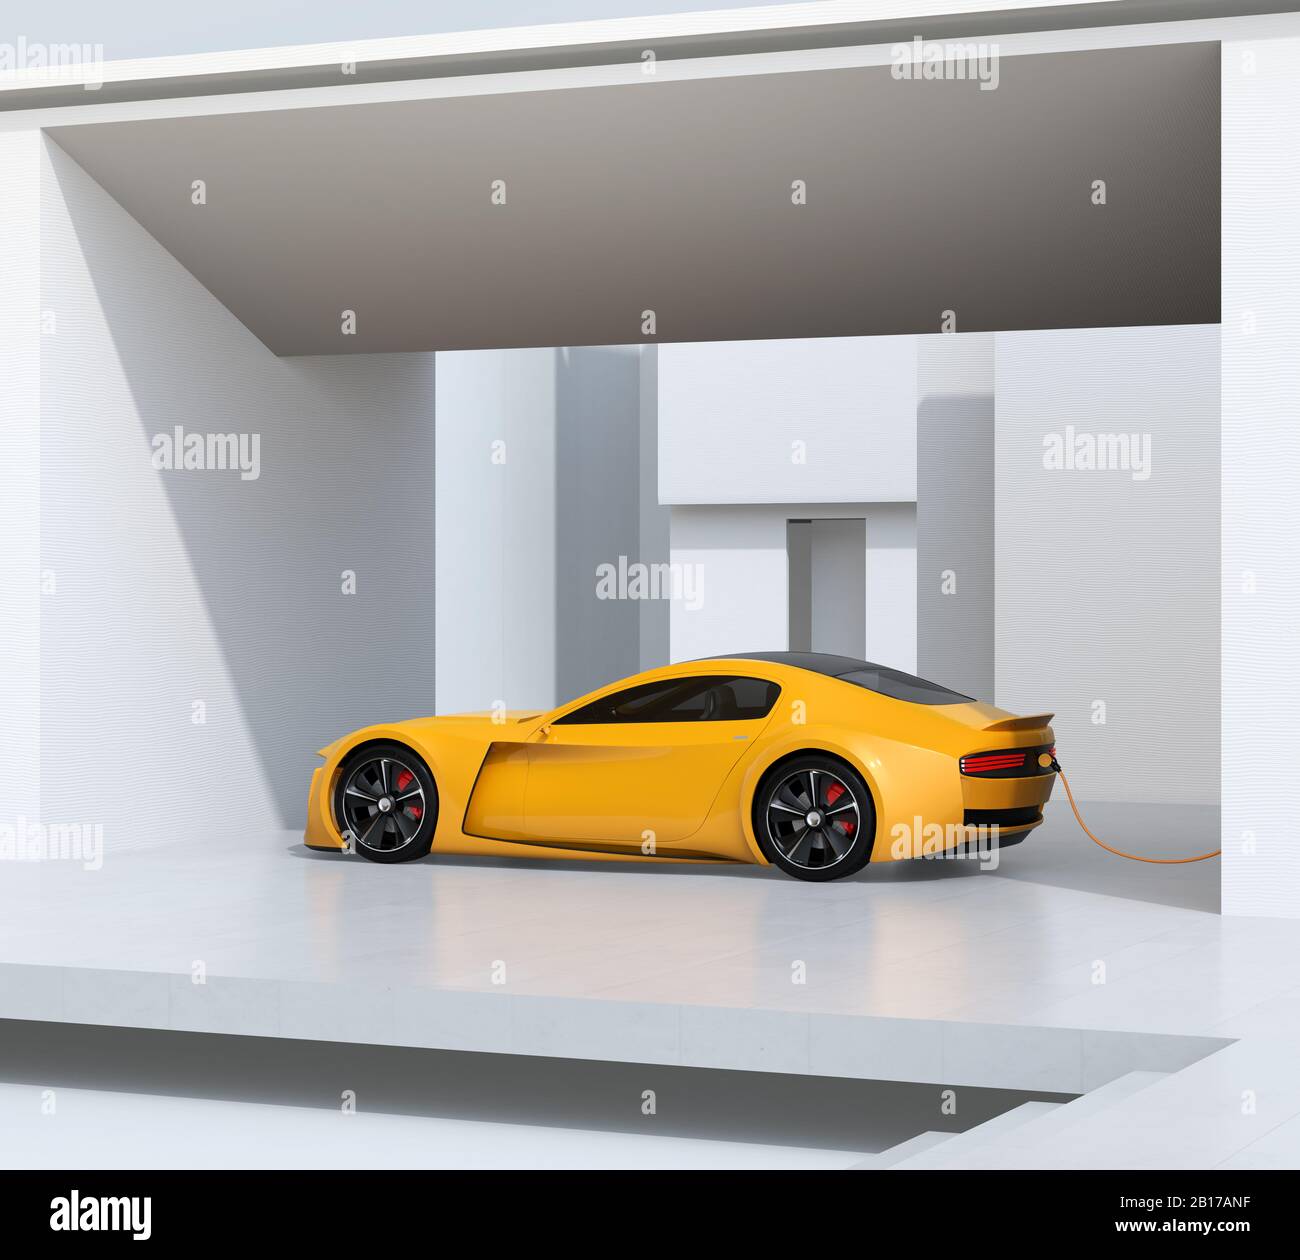 Rear view of yellow electric sports car charging at home. Sustainable lifestyle concept. 3D rendering image. Stock Photo